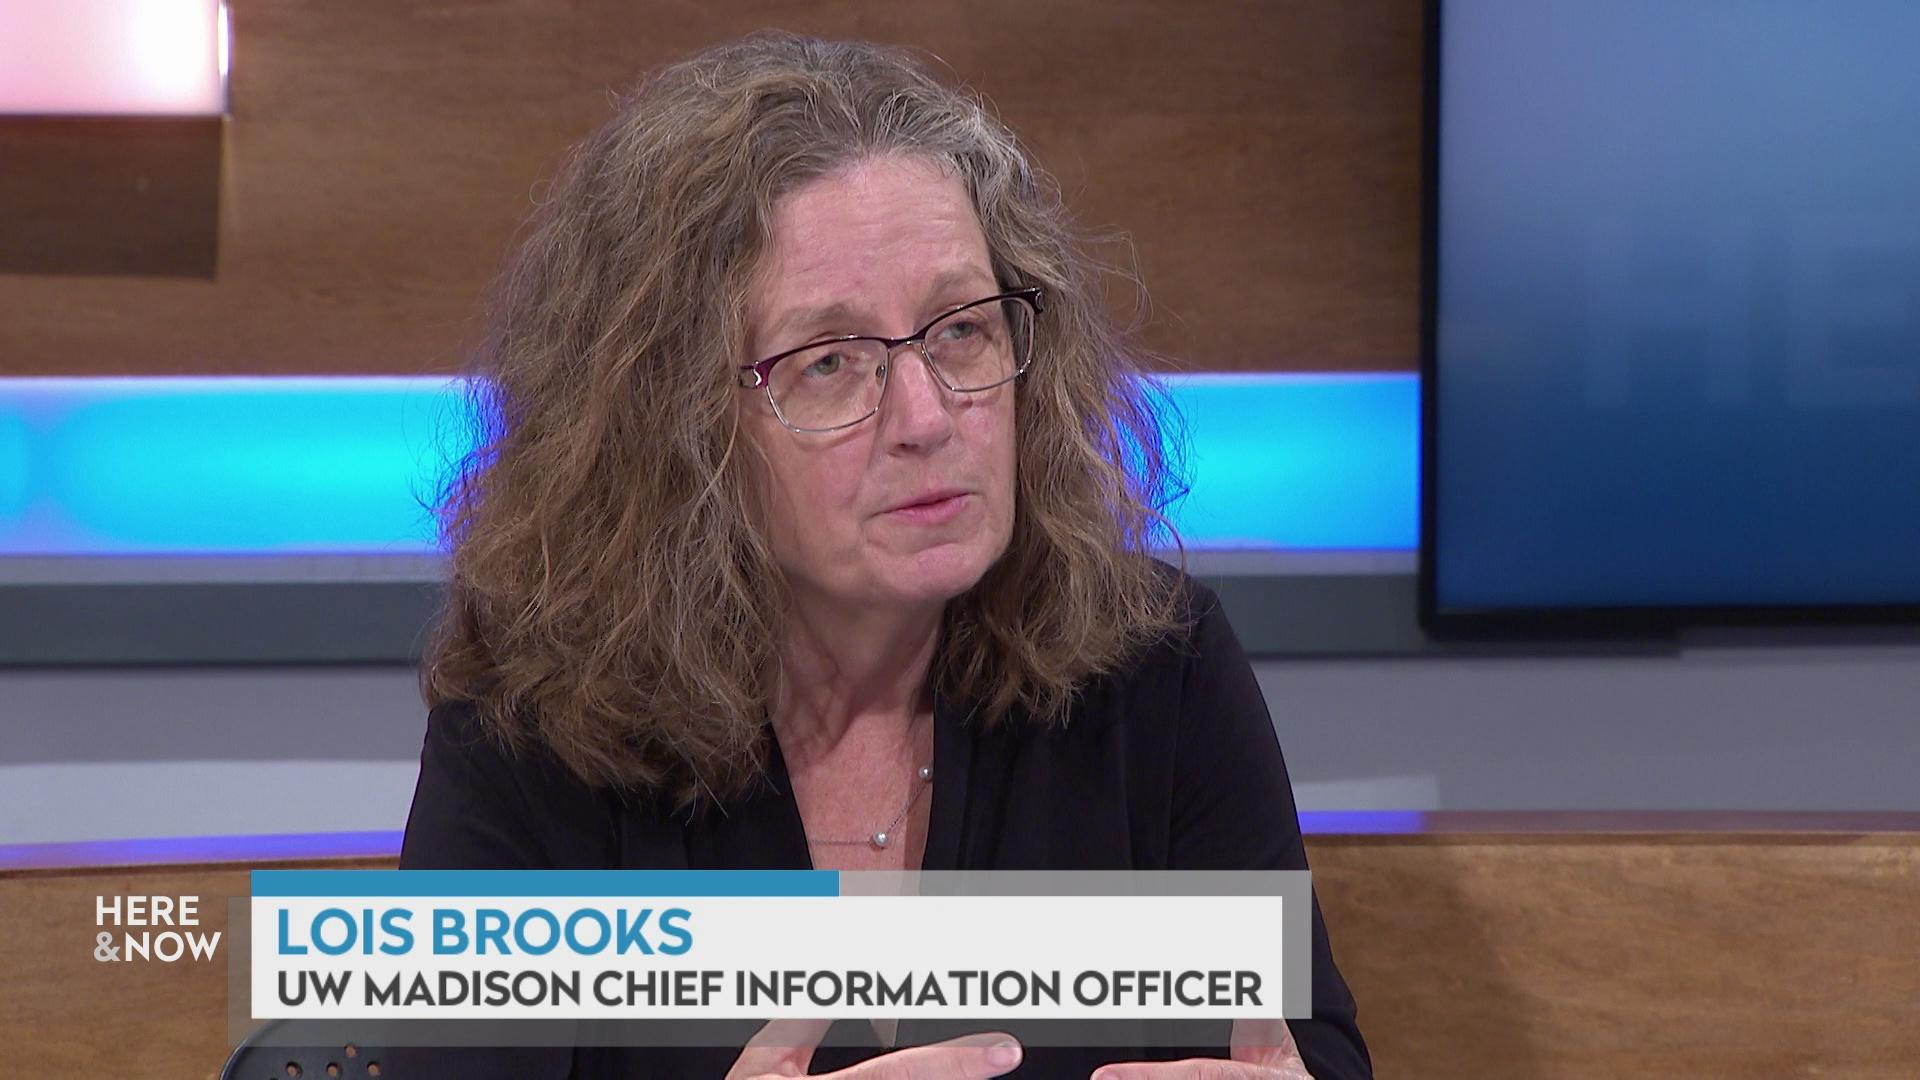 A still image shows Lois Brooks seated at the 'Here & Now' set featuring wood paneling, with a graphic at bottom reading 'Lois Brooks' and 'UW Madison Chief Information Officer.'